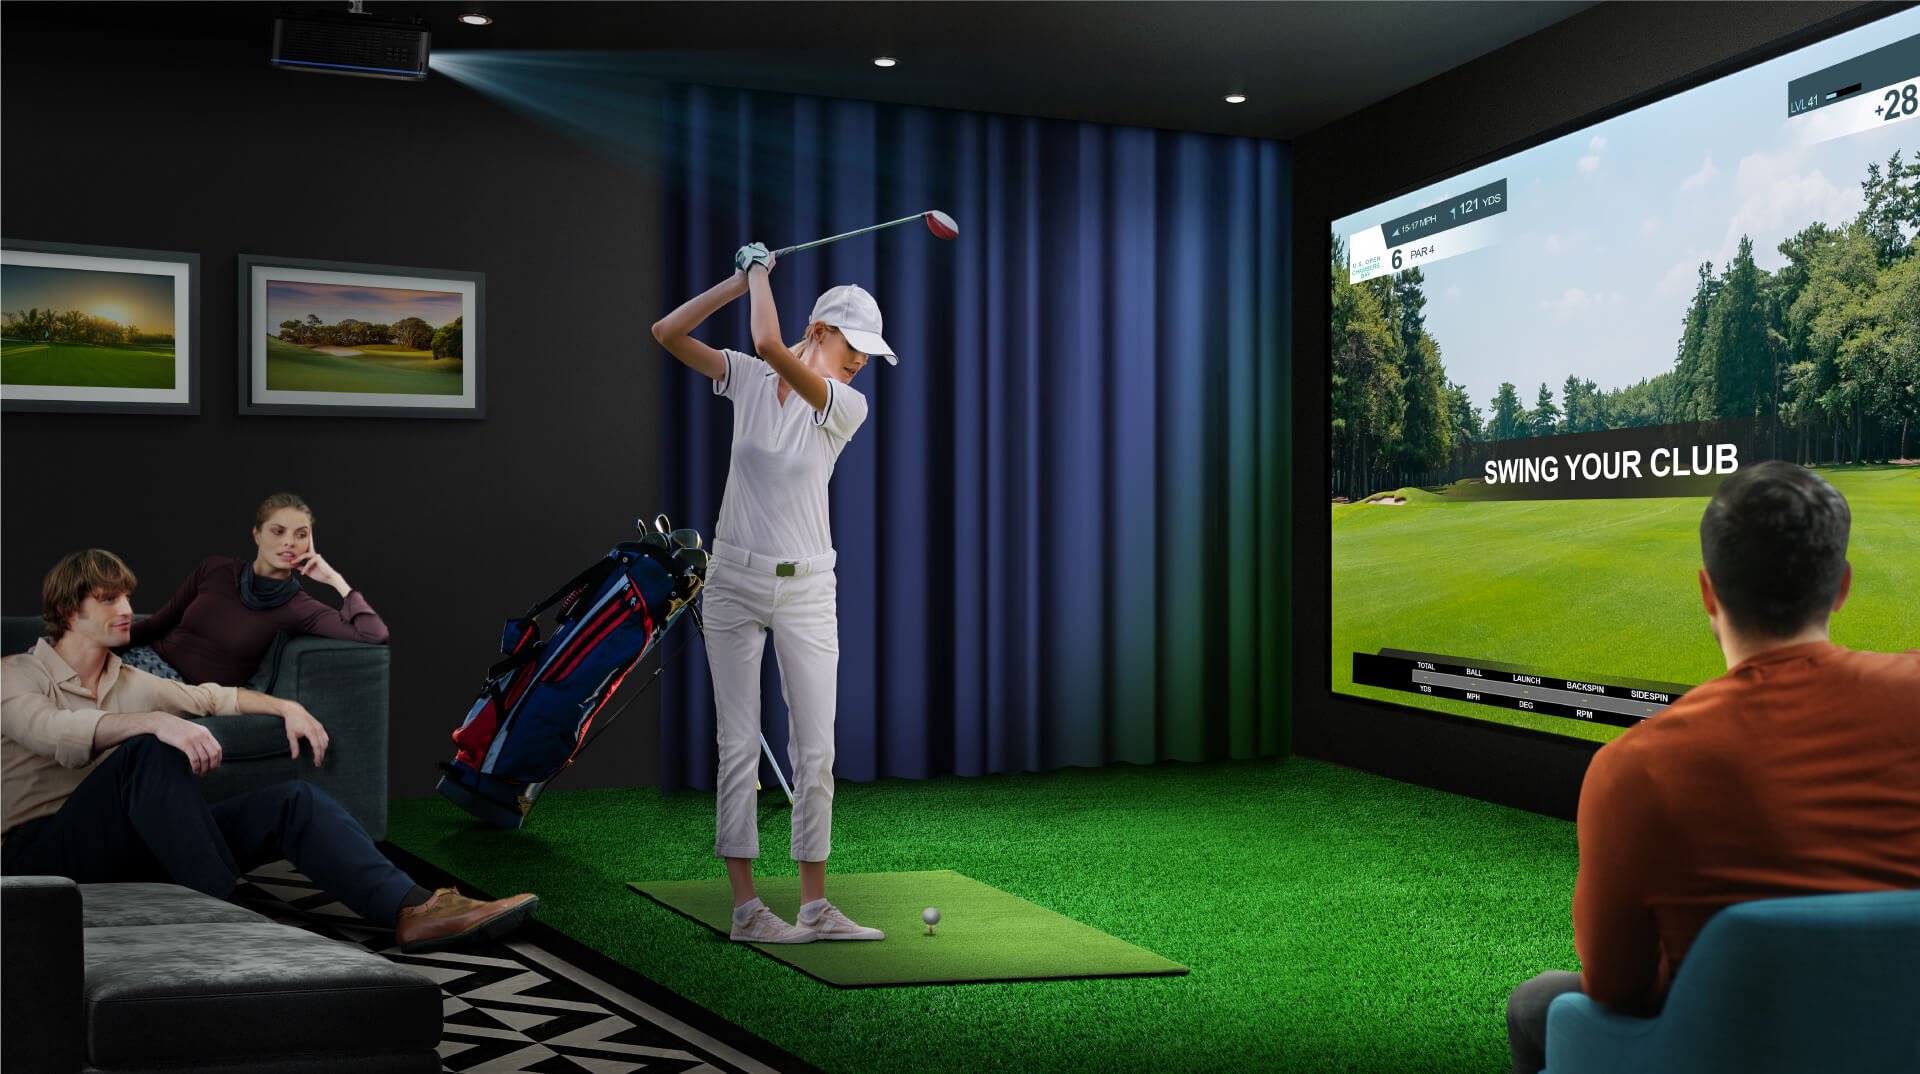 Show-off your golf skills among friends with BenQ Installation Projectors